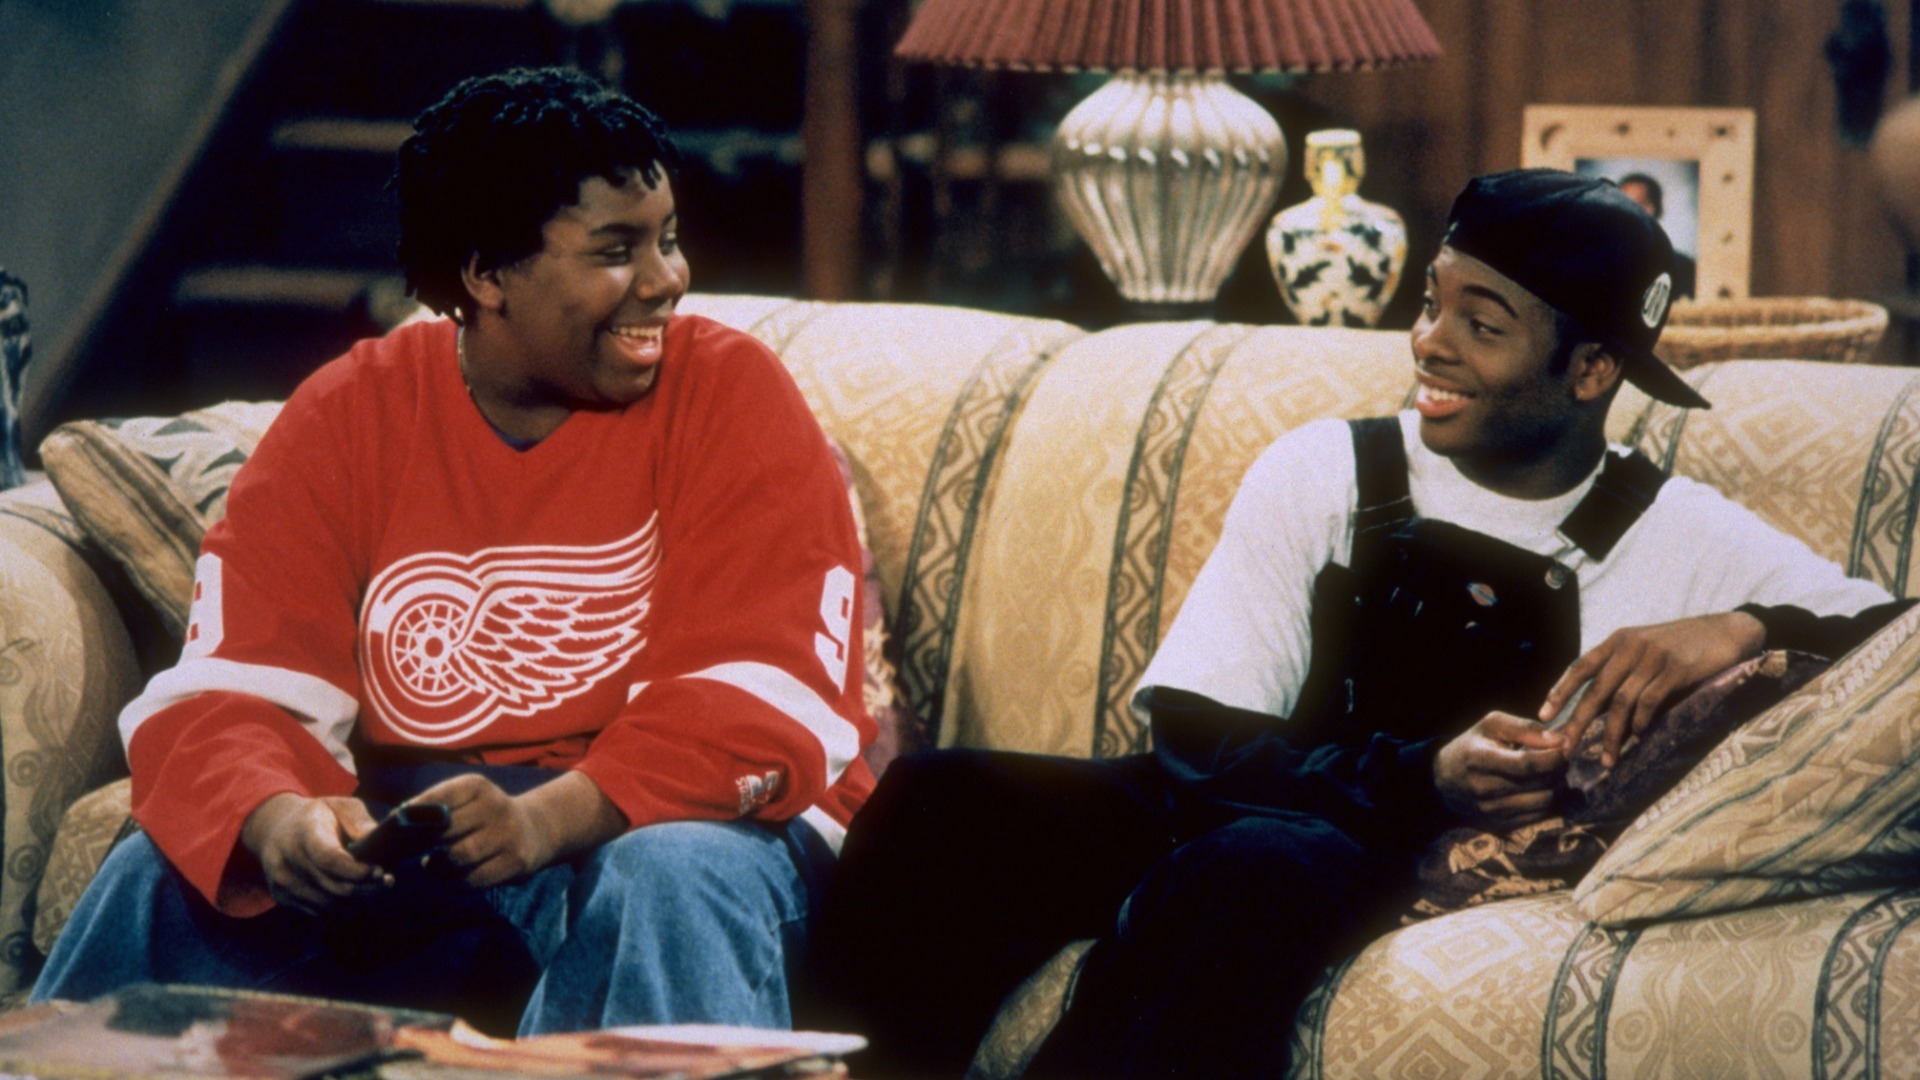 Nickelodeon classic shows including Kenan & Kel are coming to Netflix